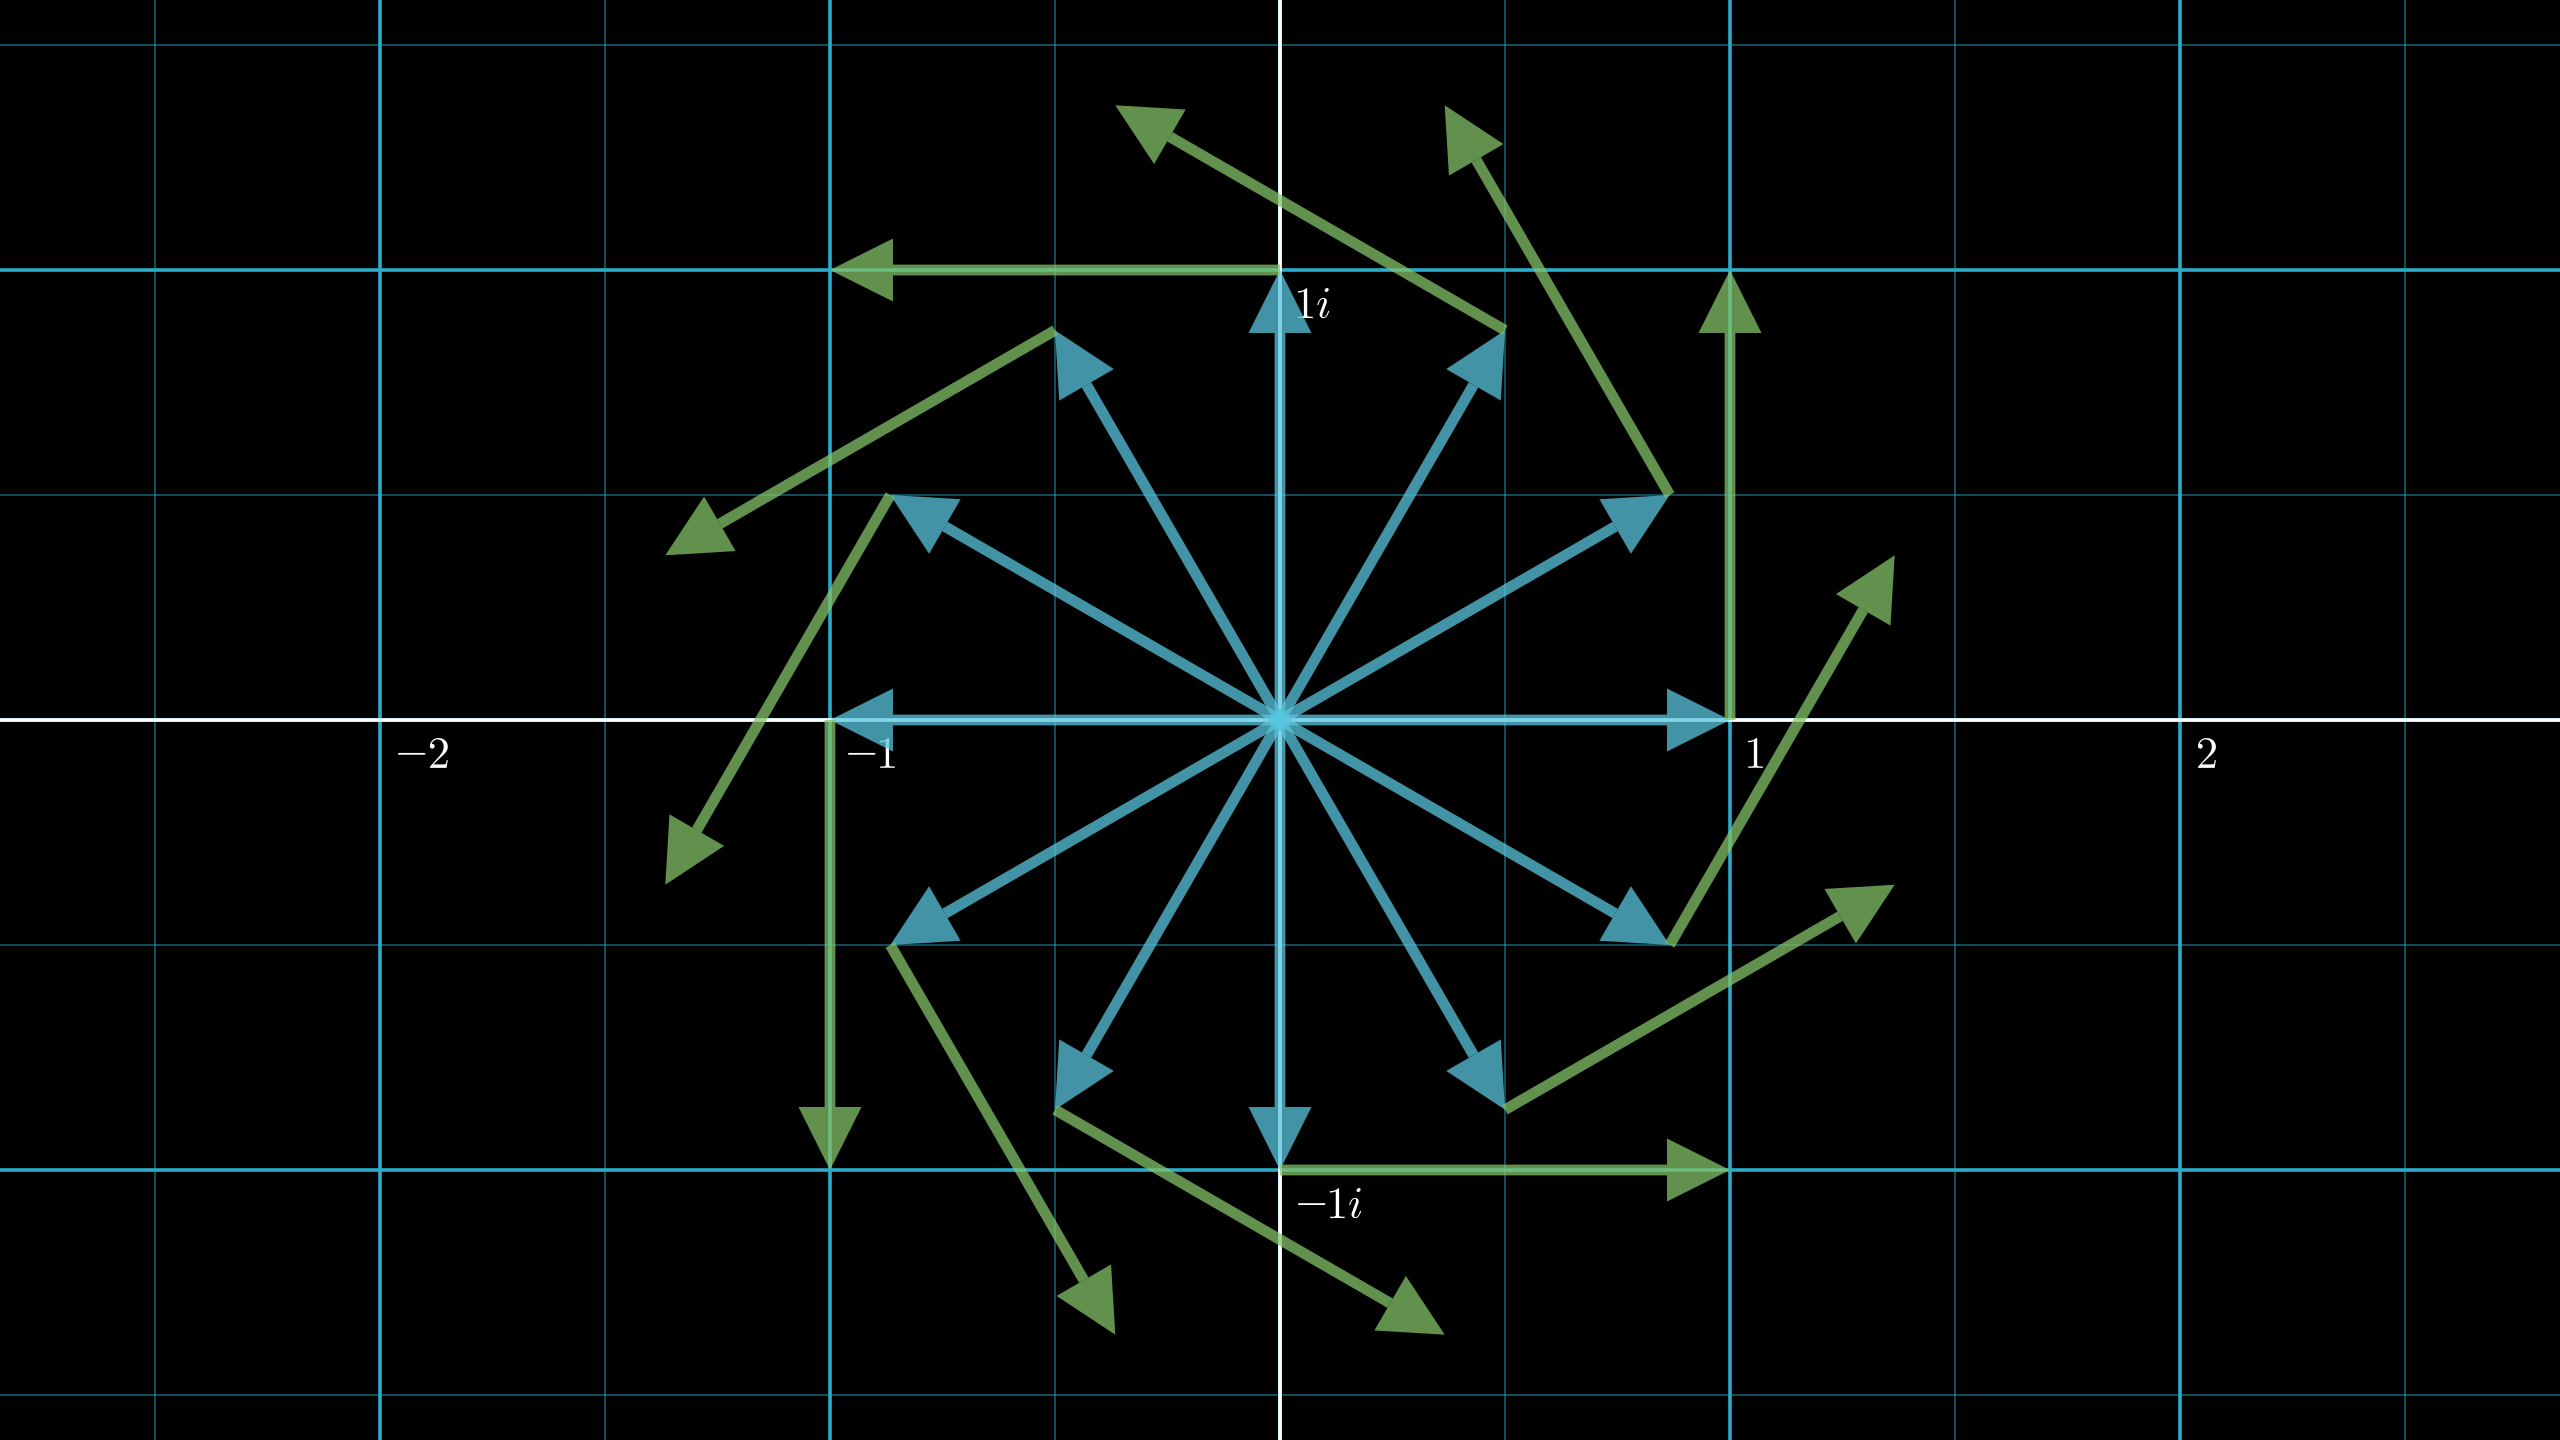 Each blue arrow above pointing outward from the origin represents an example value of $e^{it}$, thought of as a position vector. The corresponding green arrow at its tip shows what the velocity, equal to the position rotated 90 degrees counterclockwise, would have to be for that particular position.